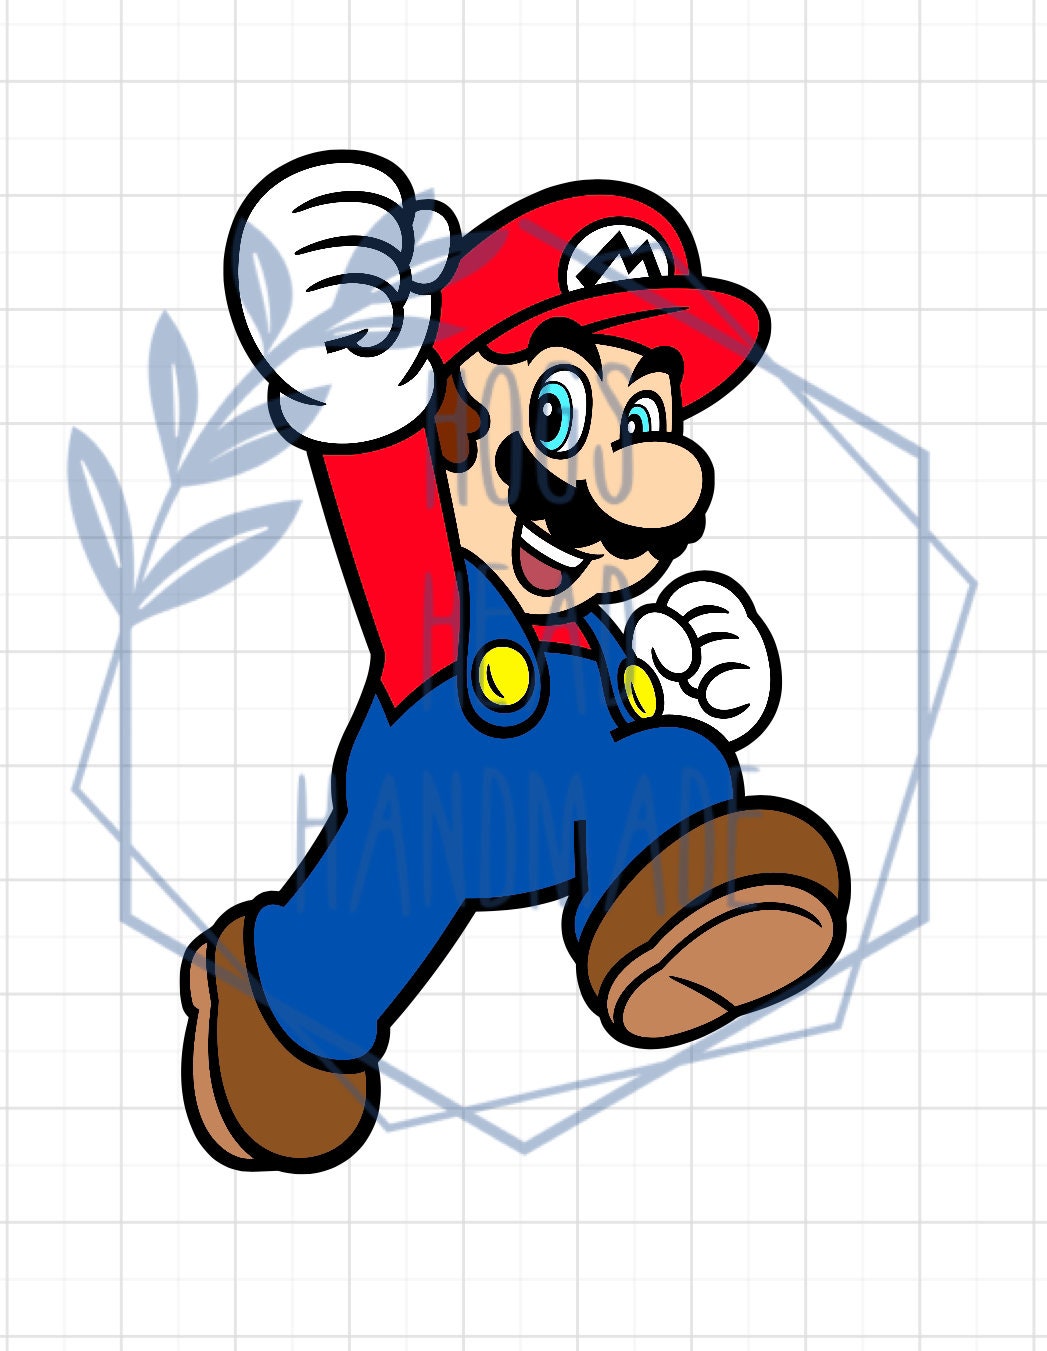 Luigi Patch (3 Inch) Iron or Sew-on Badge Super Mario Brothers Costume –  karmapatch.com